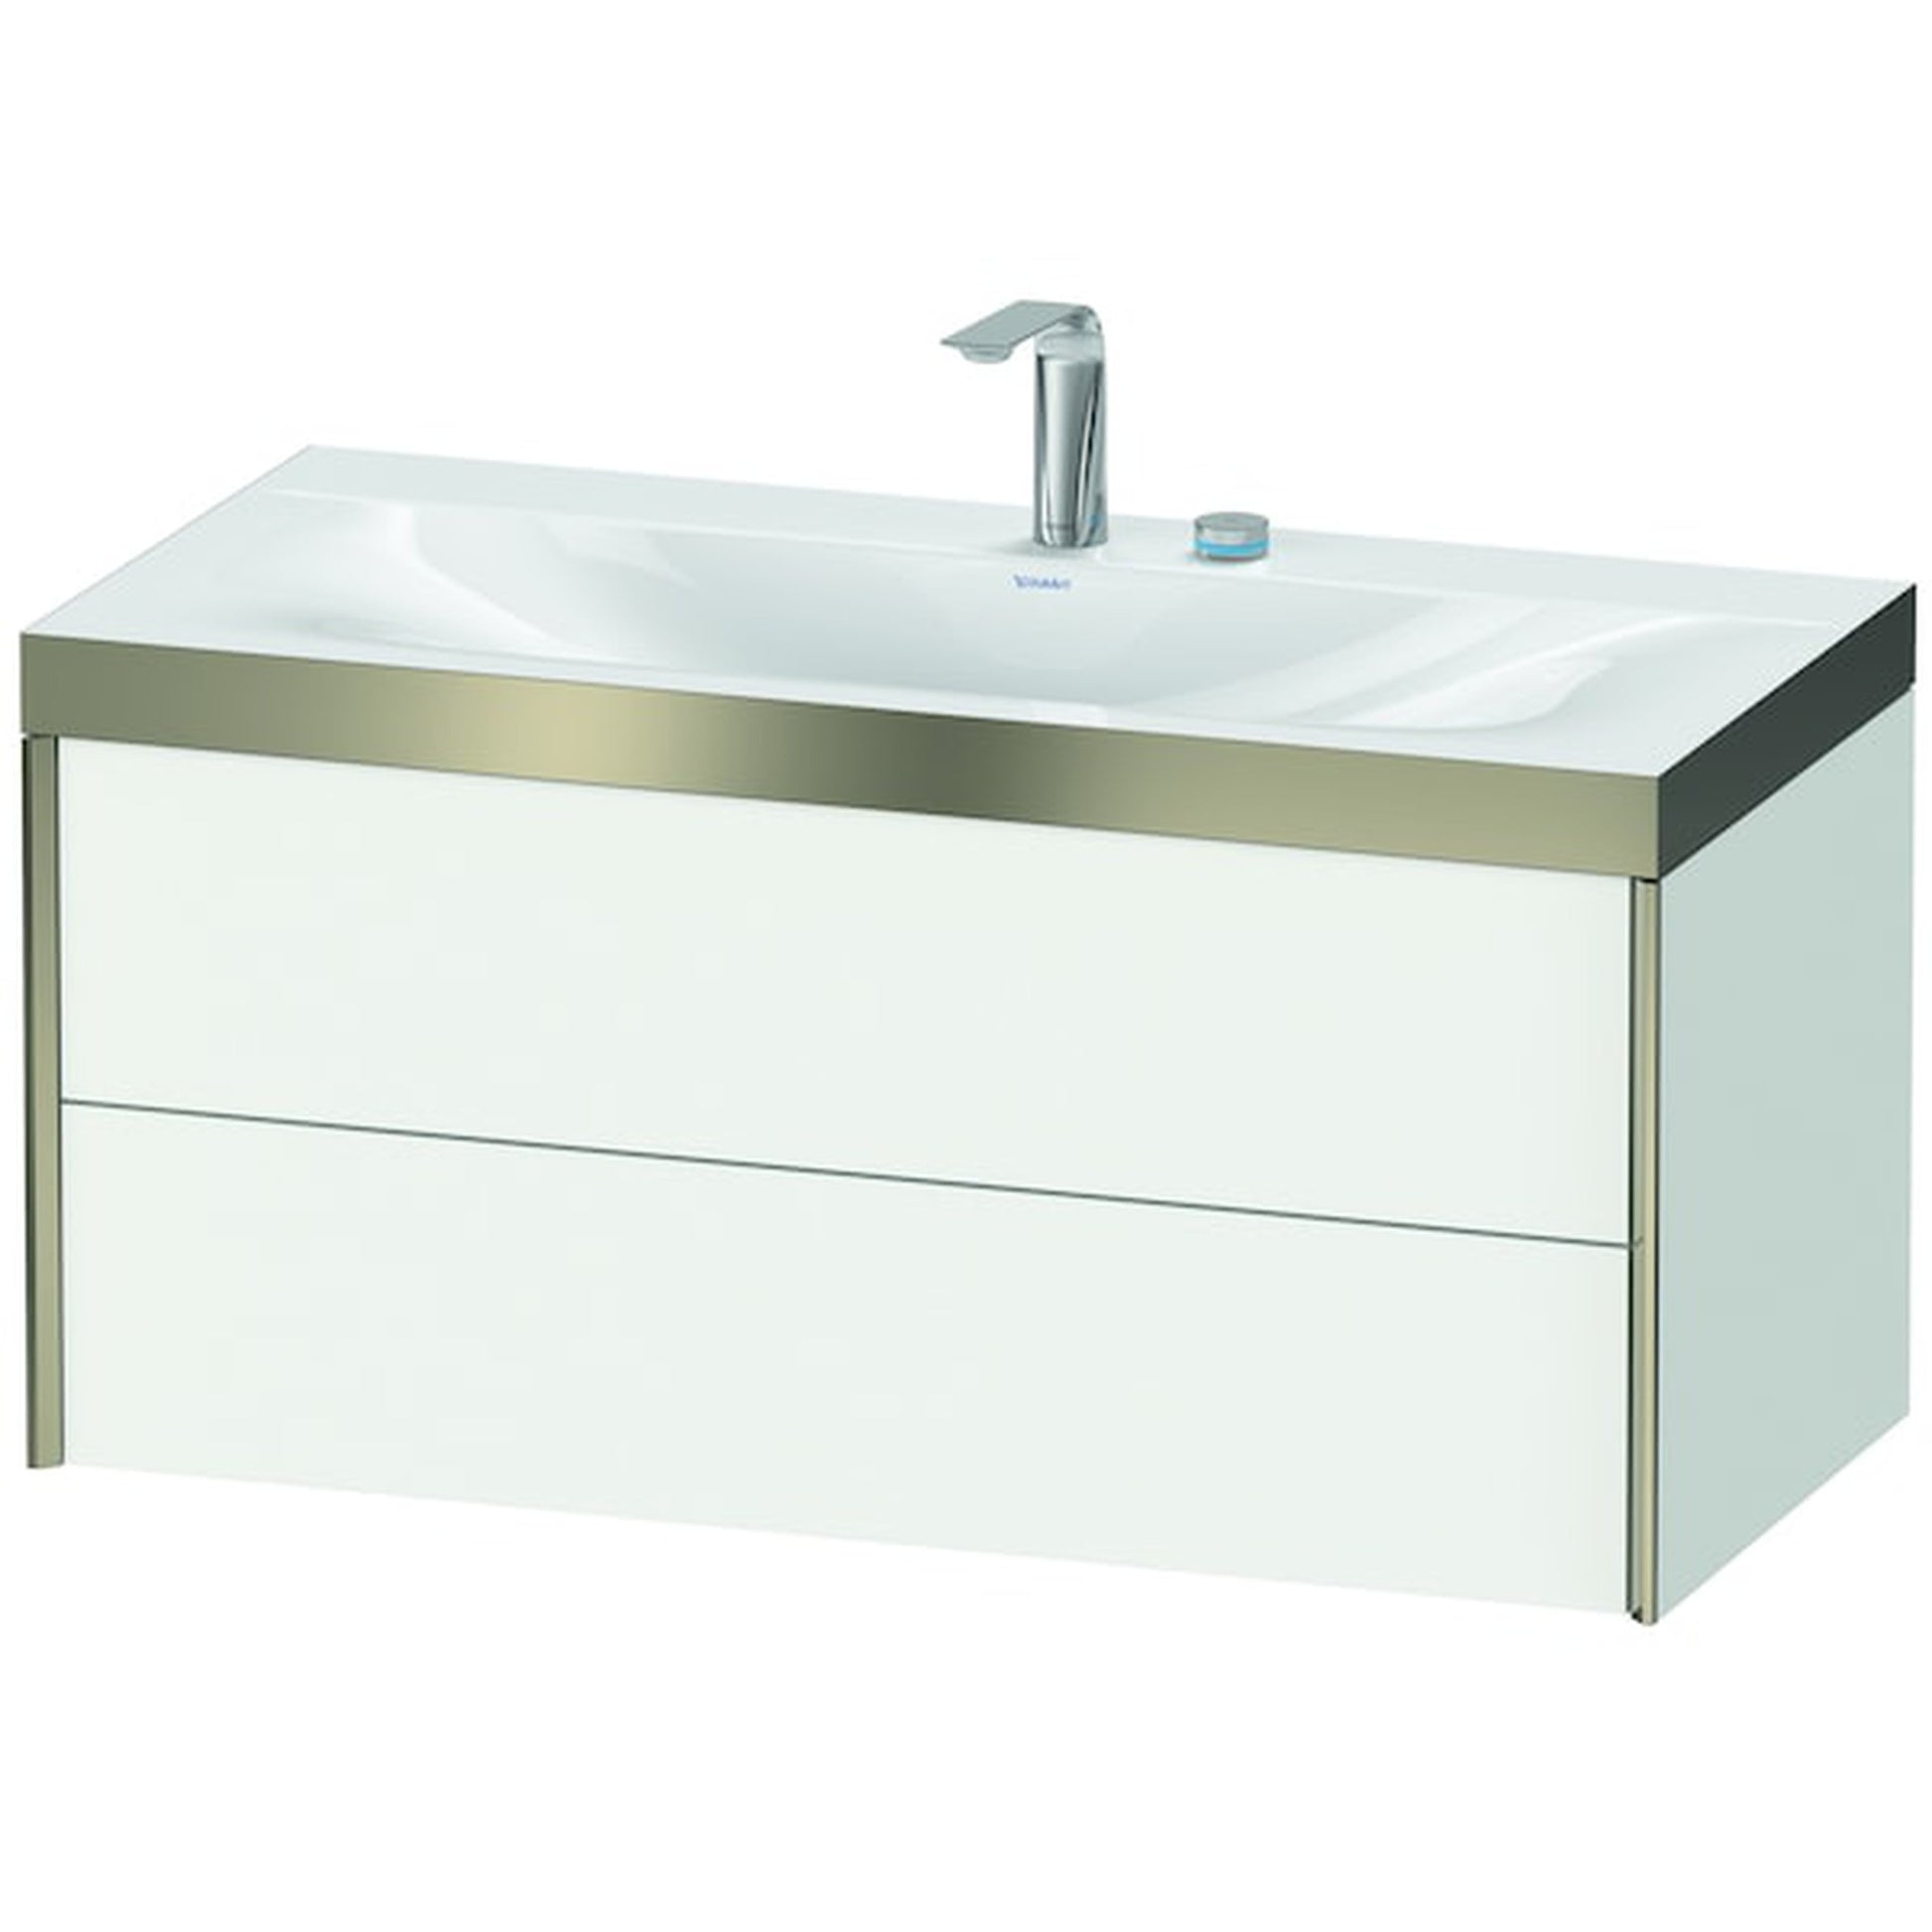 Duravit Xviu 39" x 20" x 19" Two Drawer C-Bonded Wall-Mount Vanity Kit With Two Tap Holes, White (XV4616EB118P)